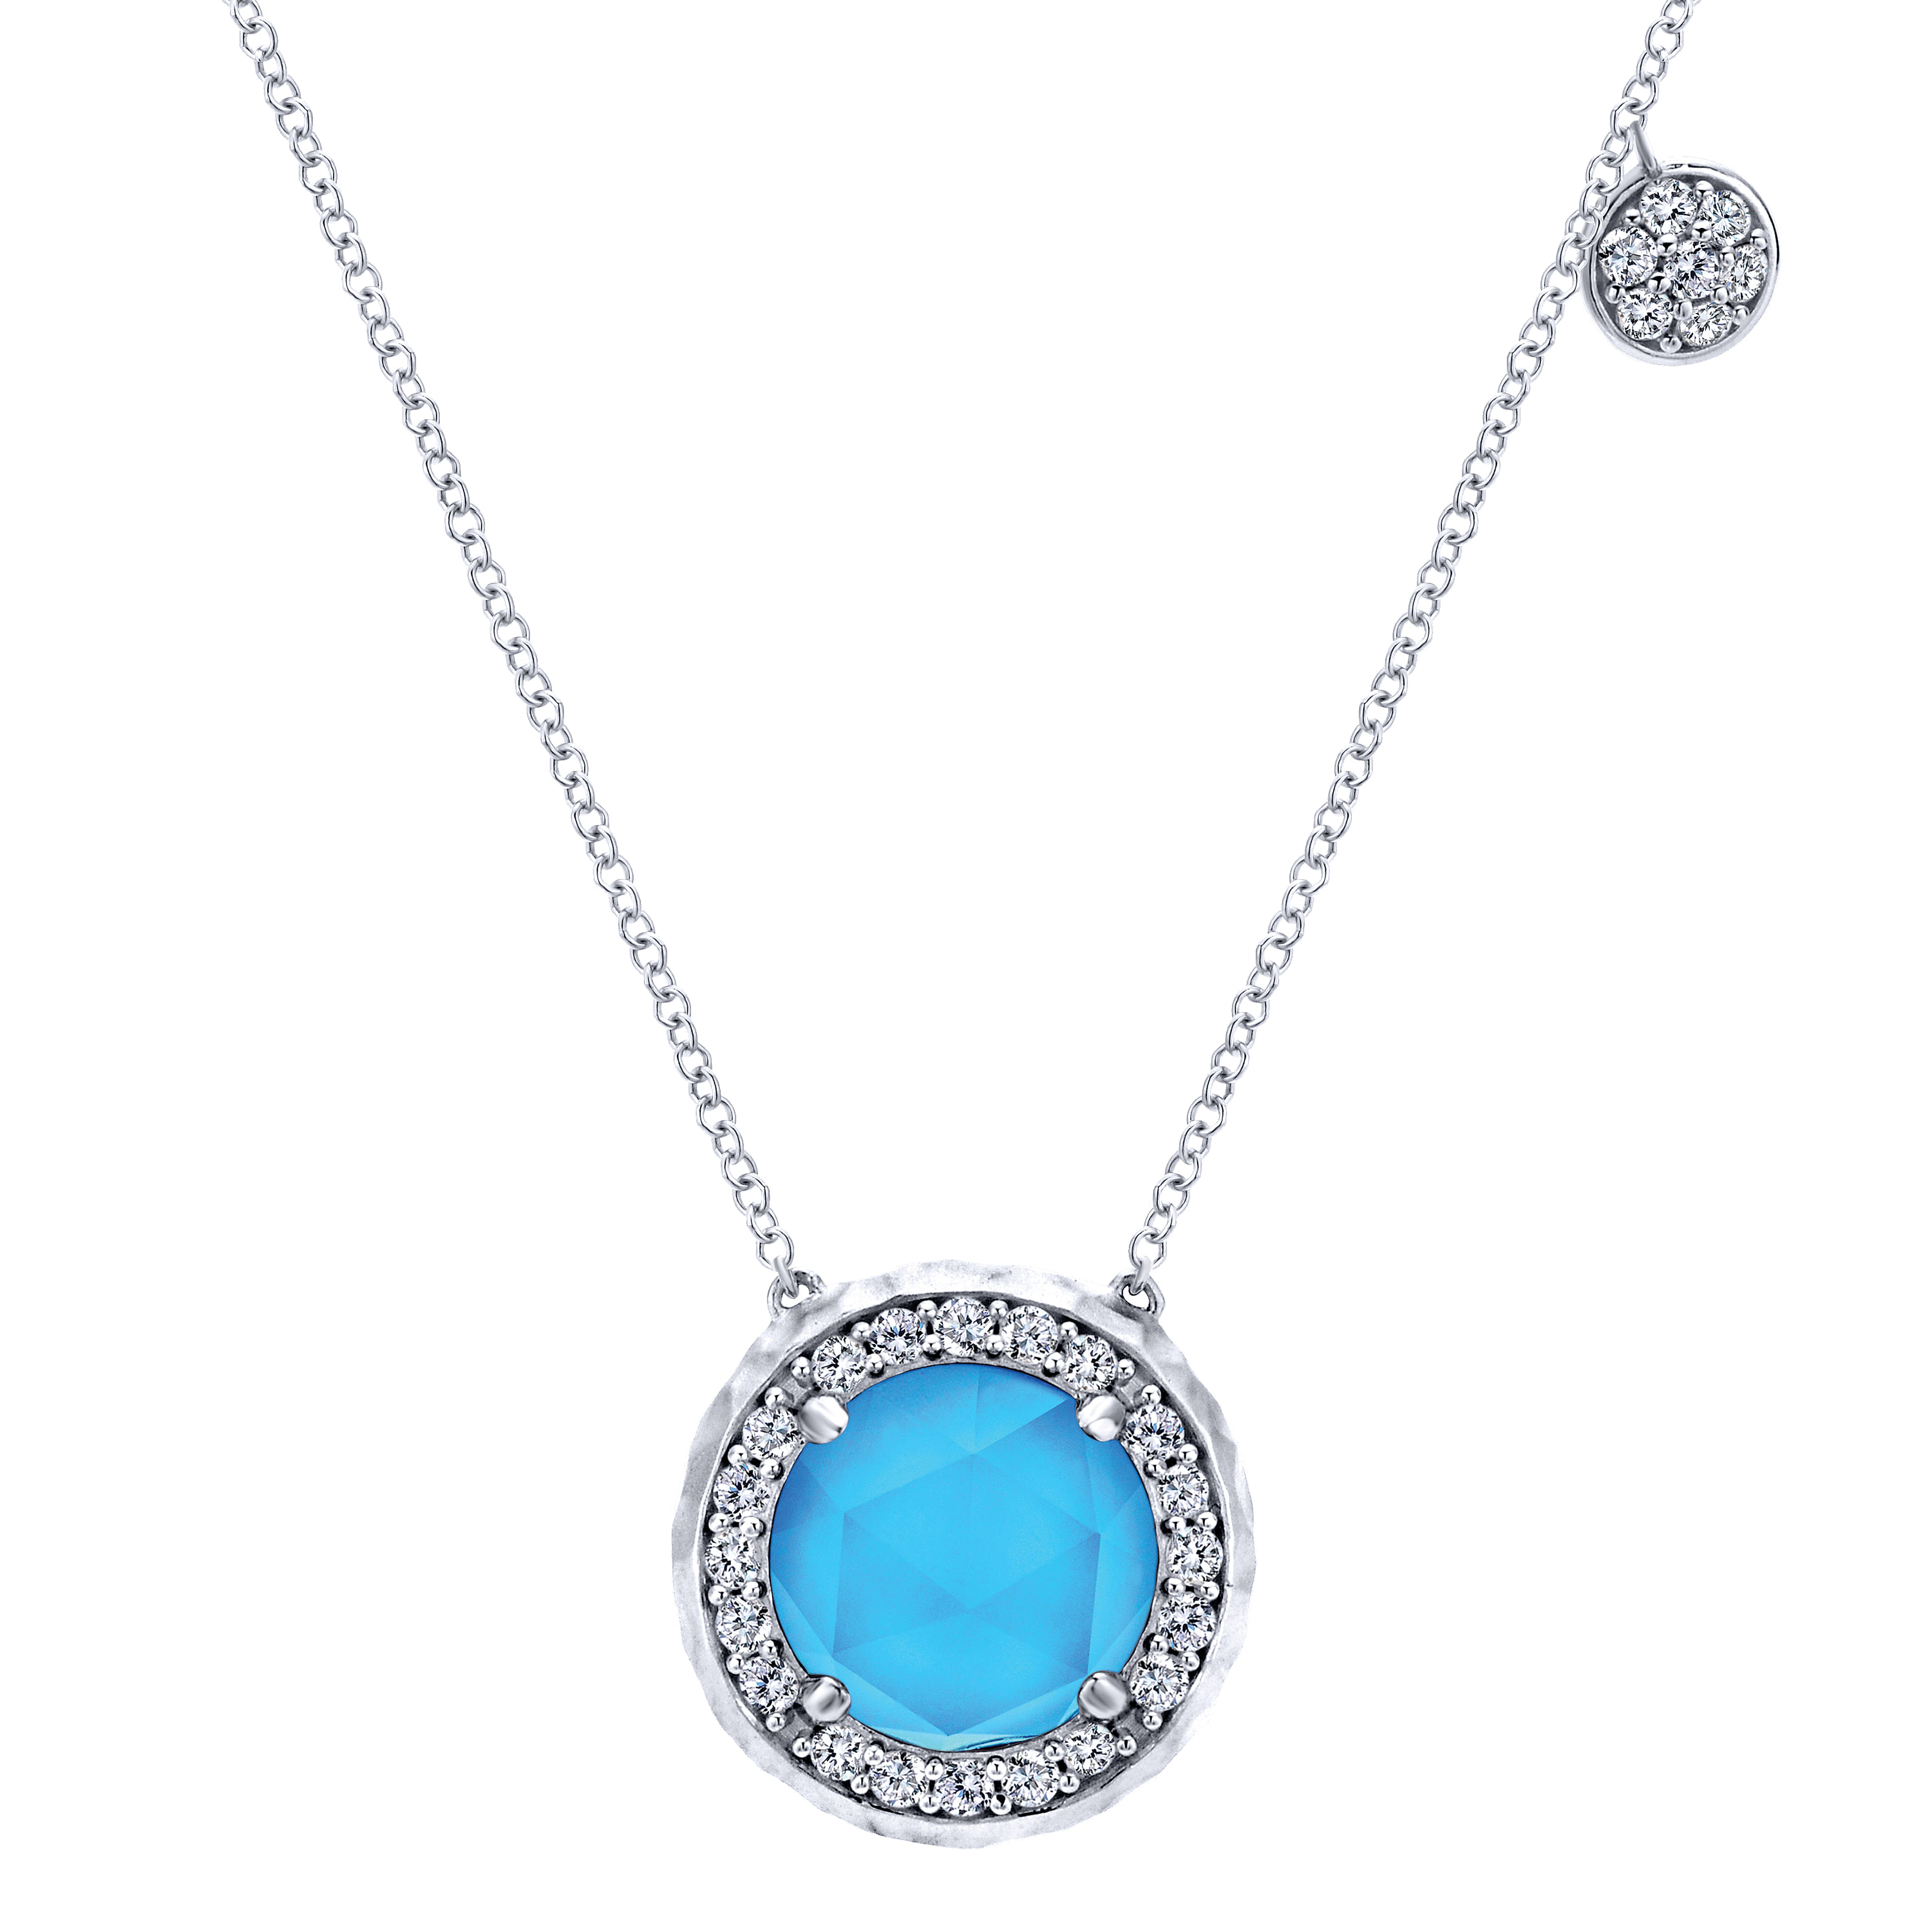 925 Sterling Silver Round Rock Crystal/Turquoise and White Sapphire Halo Pendant Necklace